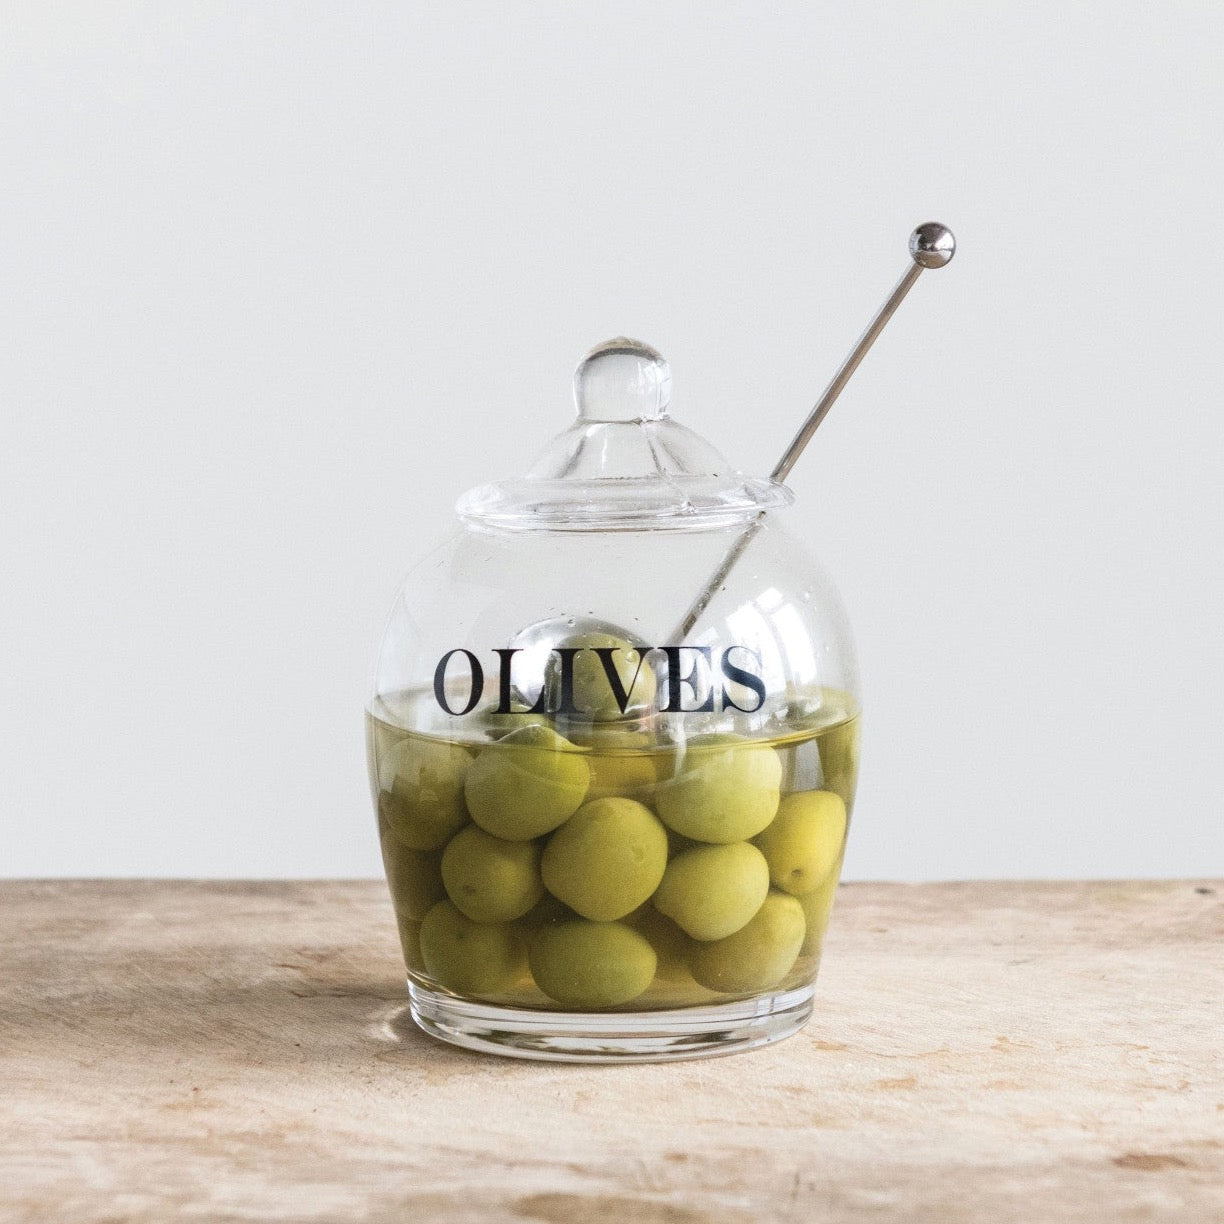 Glass Jar w/ Stainless Steel Slotted Spoon "Olives", Set of 2